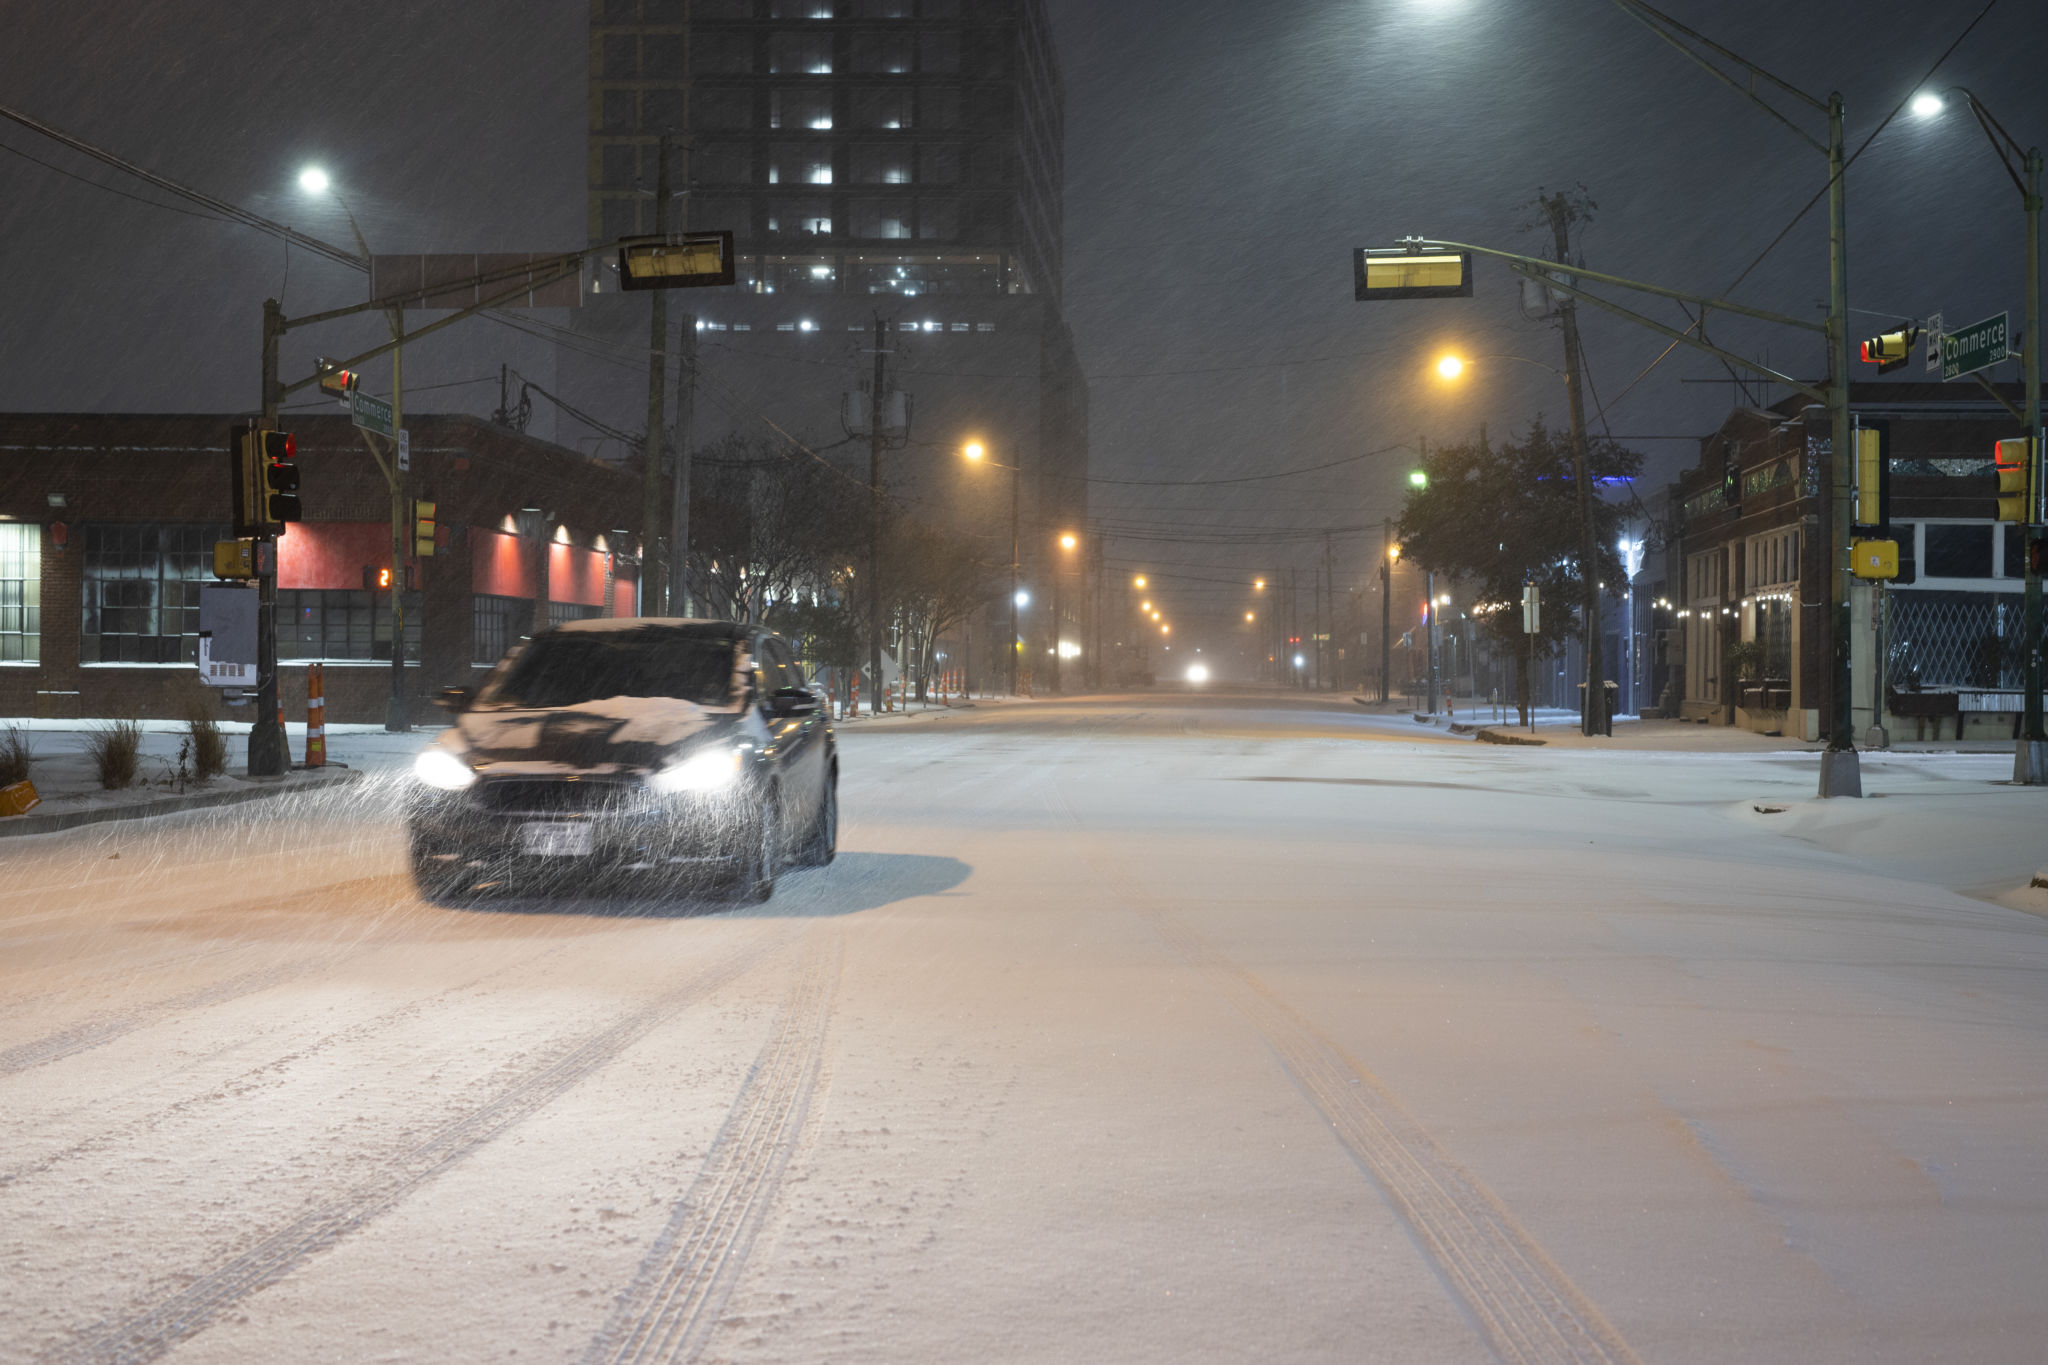 An electric vehicle drives through a snowstorm at nighttime